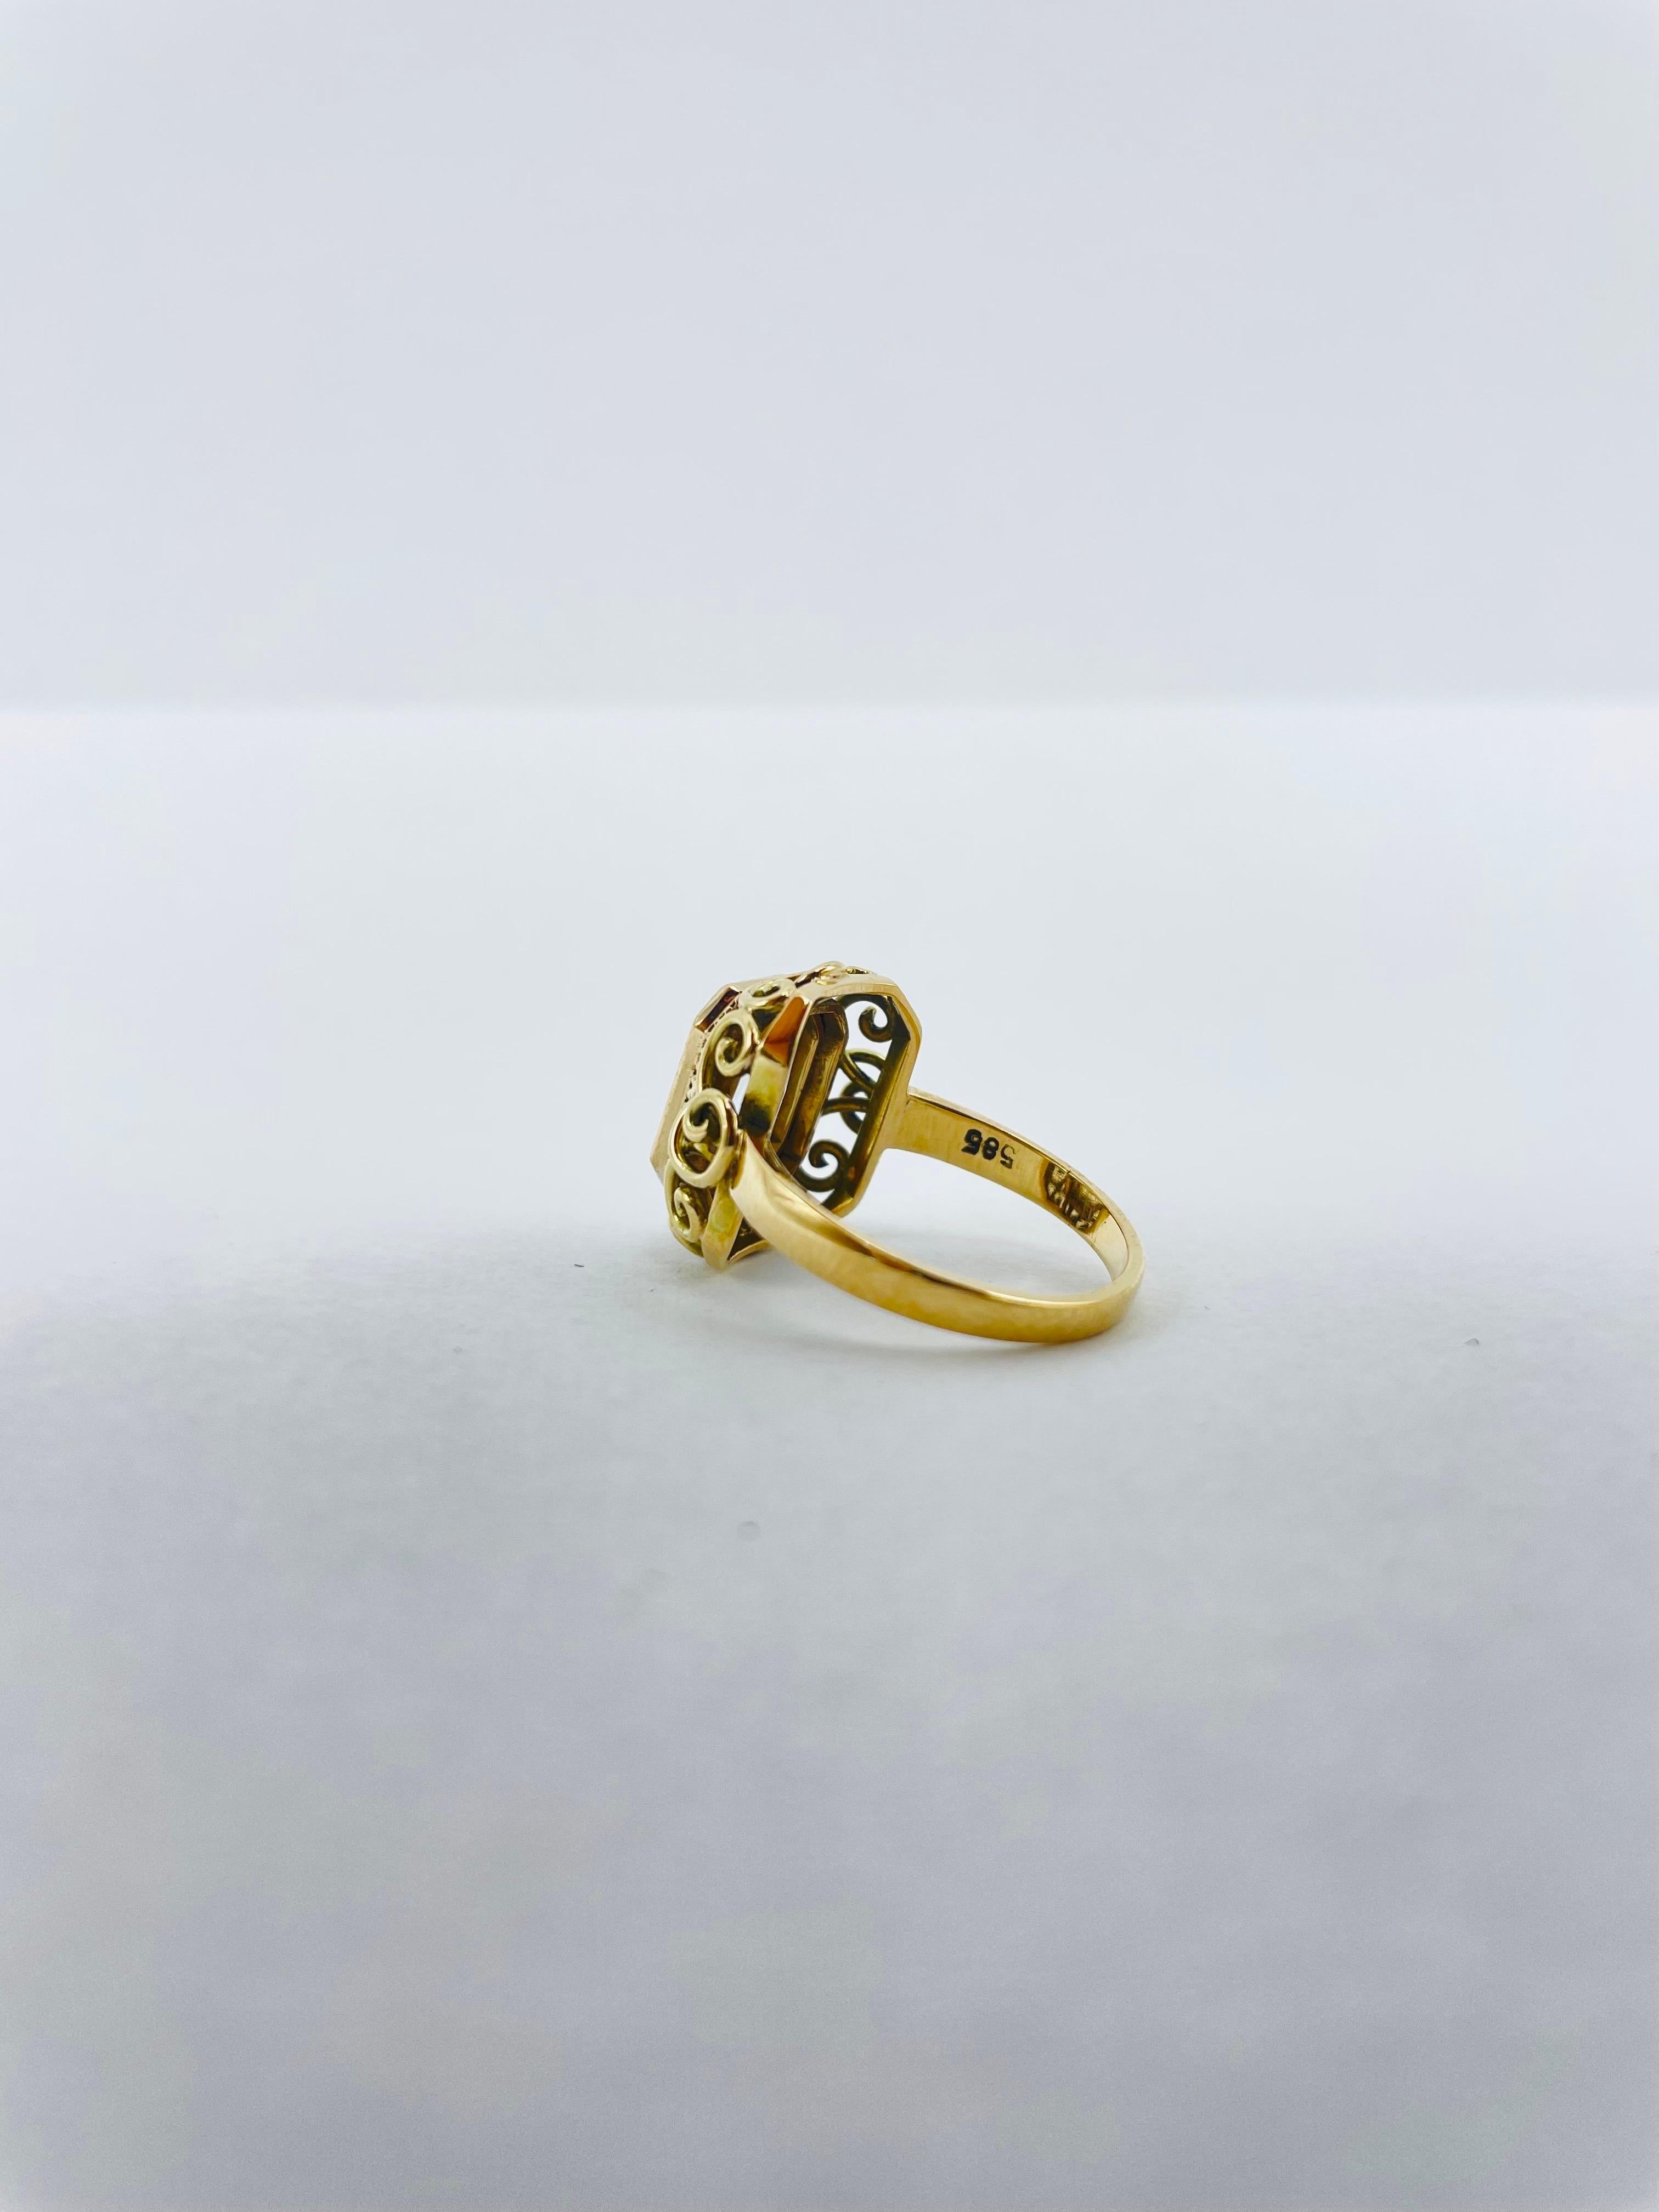 Noble 14k Gold Cocktail Ring with Aquarine For Sale 2